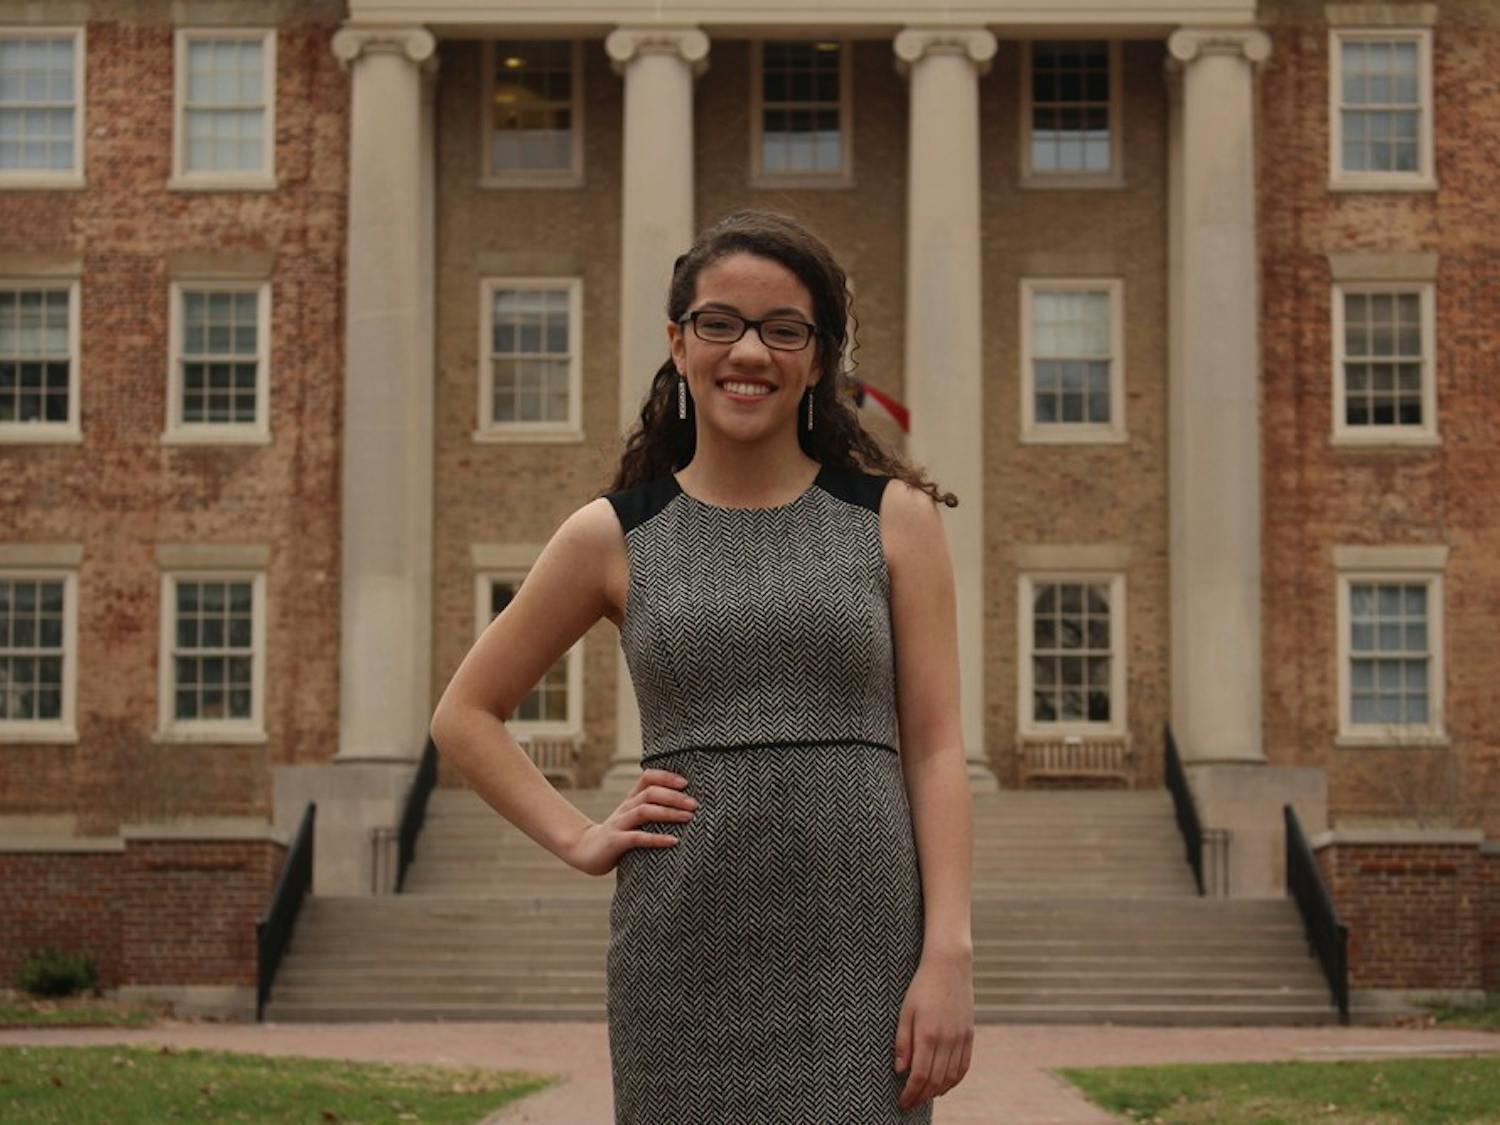 Dakota Foard will be the chairwoman of the UNC Honor Court if approved by Student Congress.